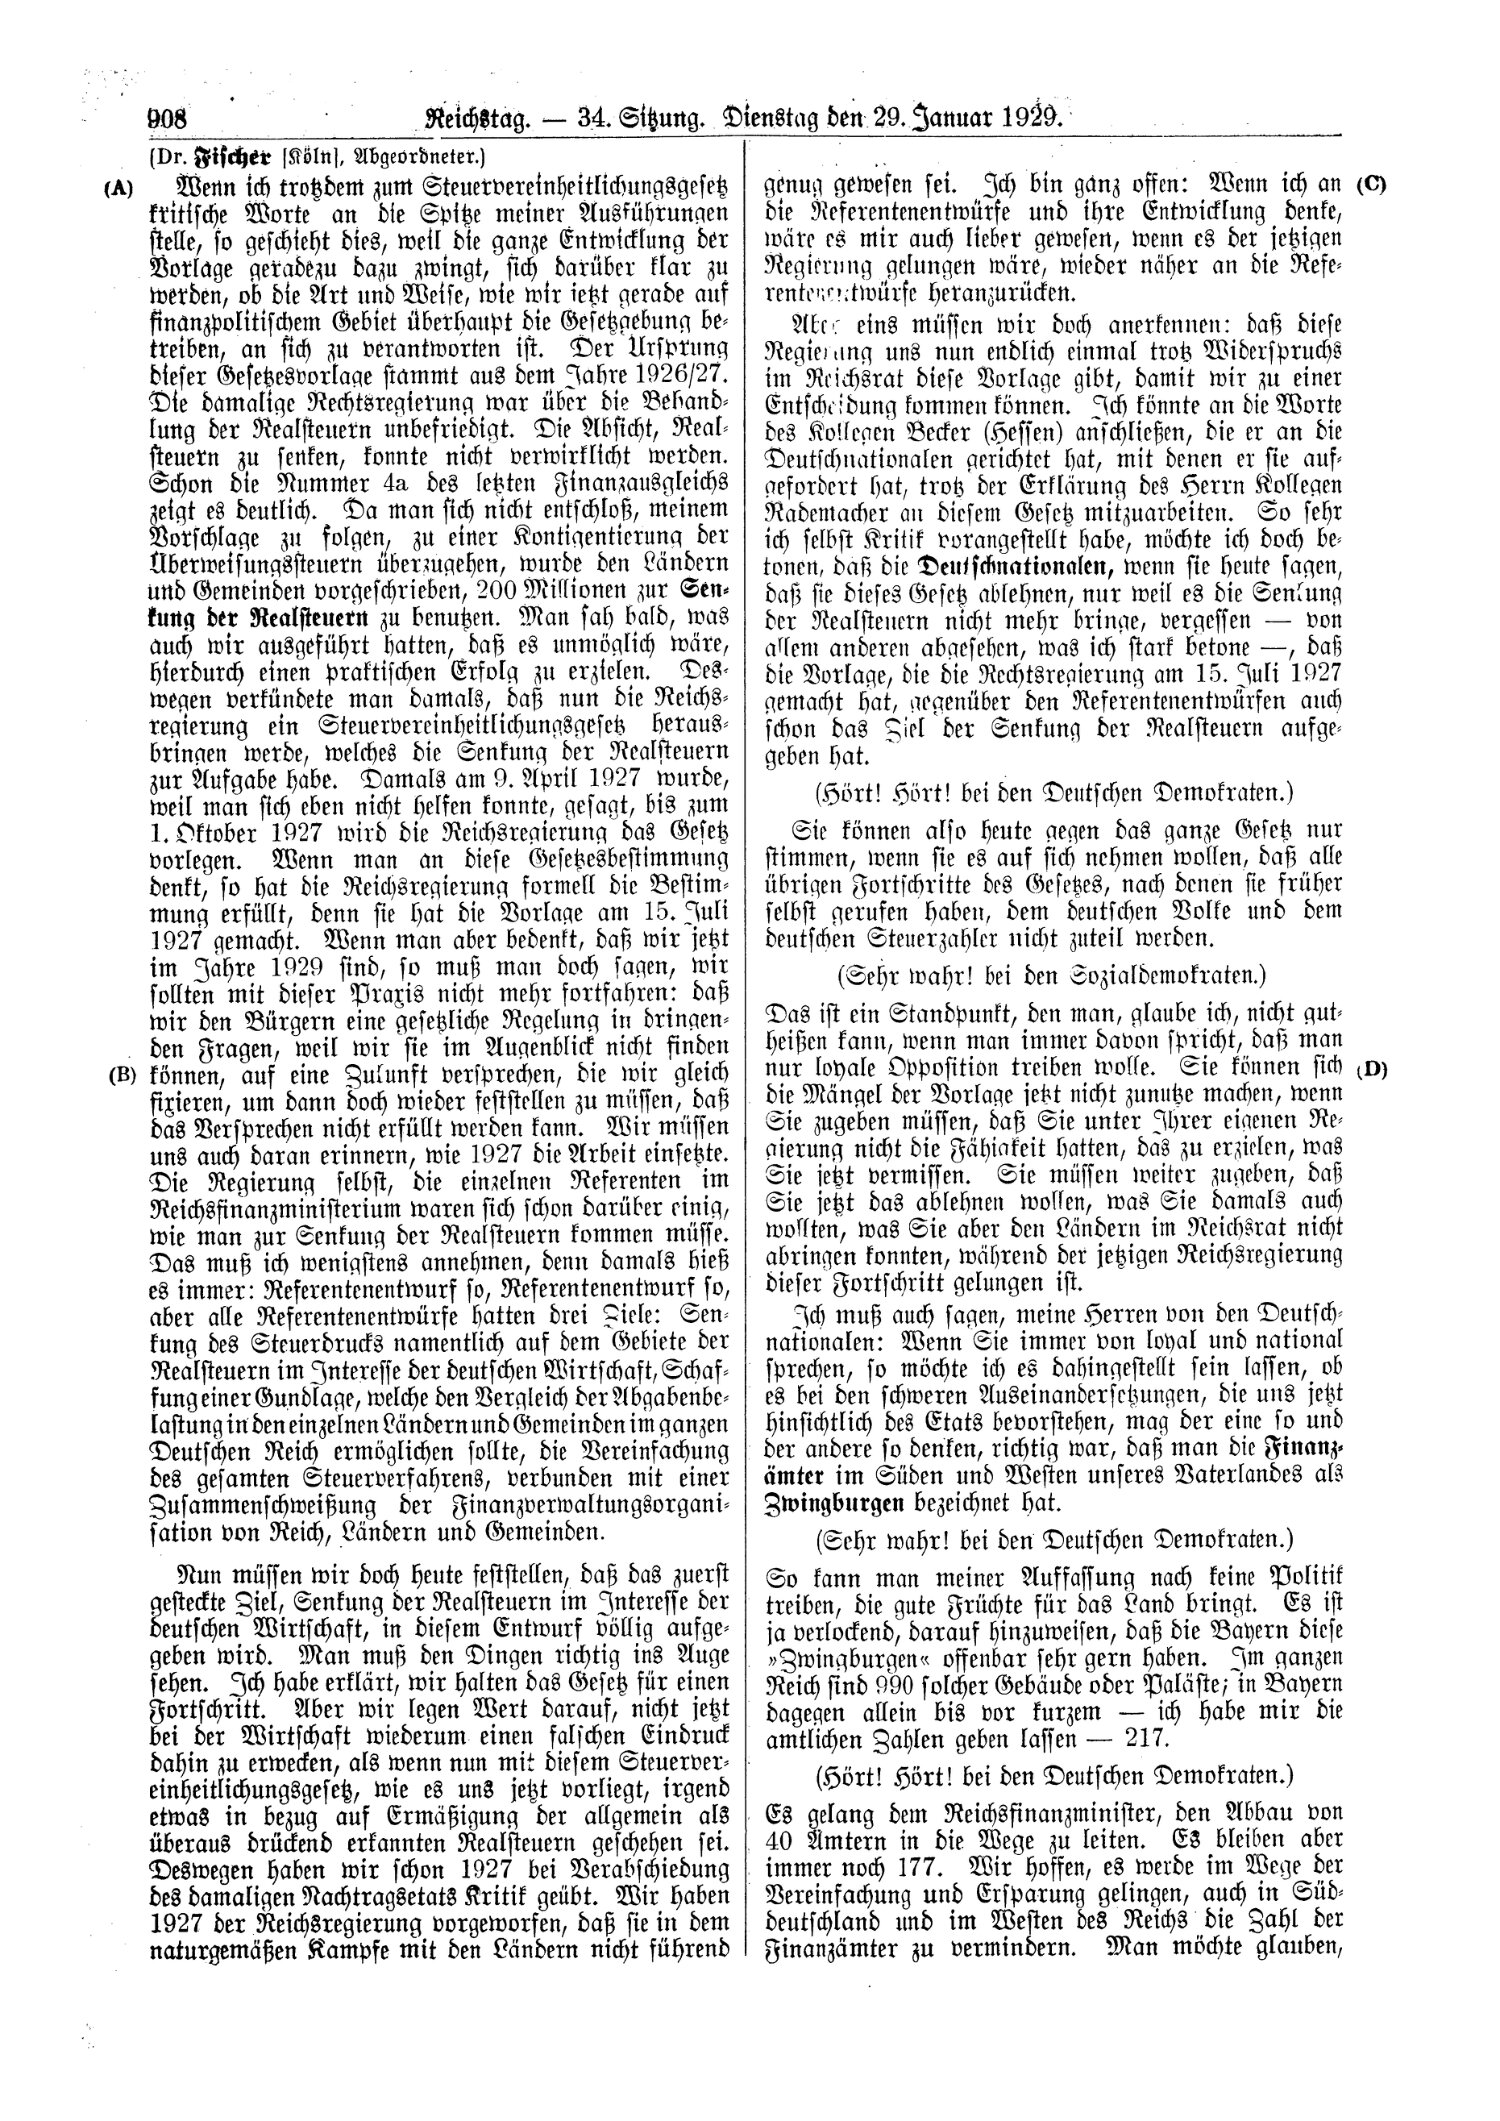 Scan of page 908